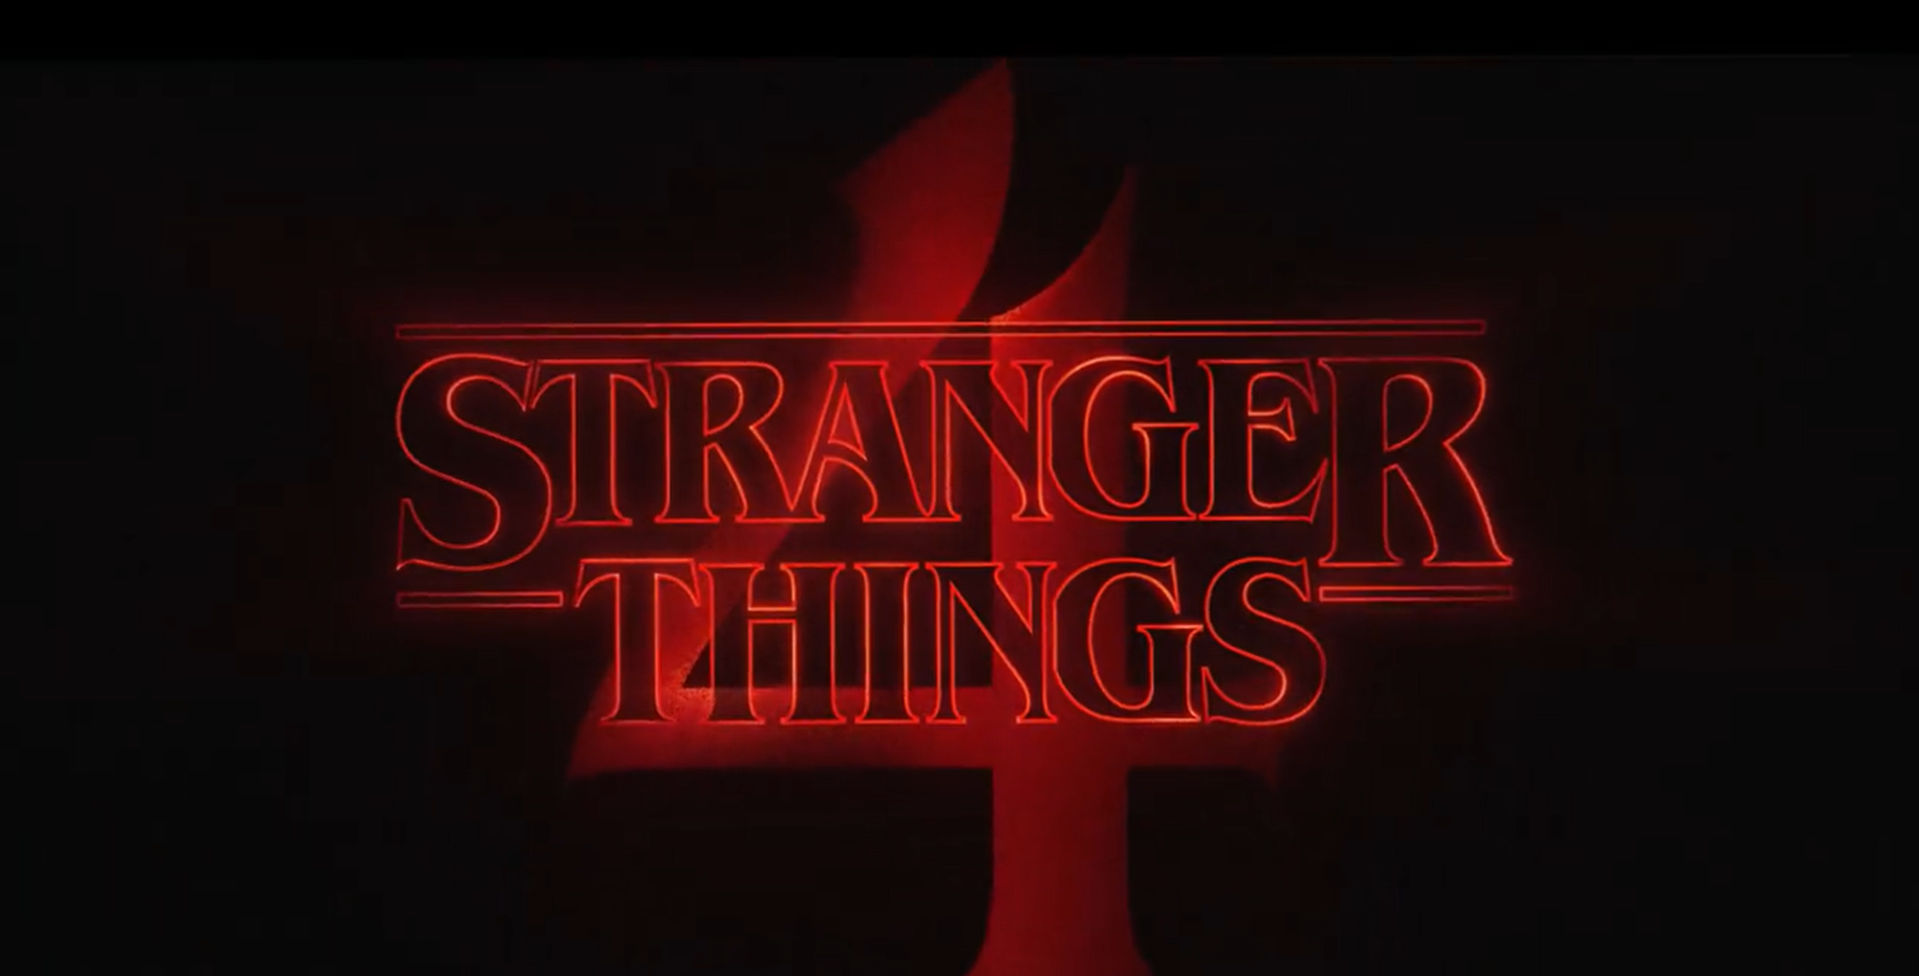 ‘Stranger Things’ Season 4: All you need to know